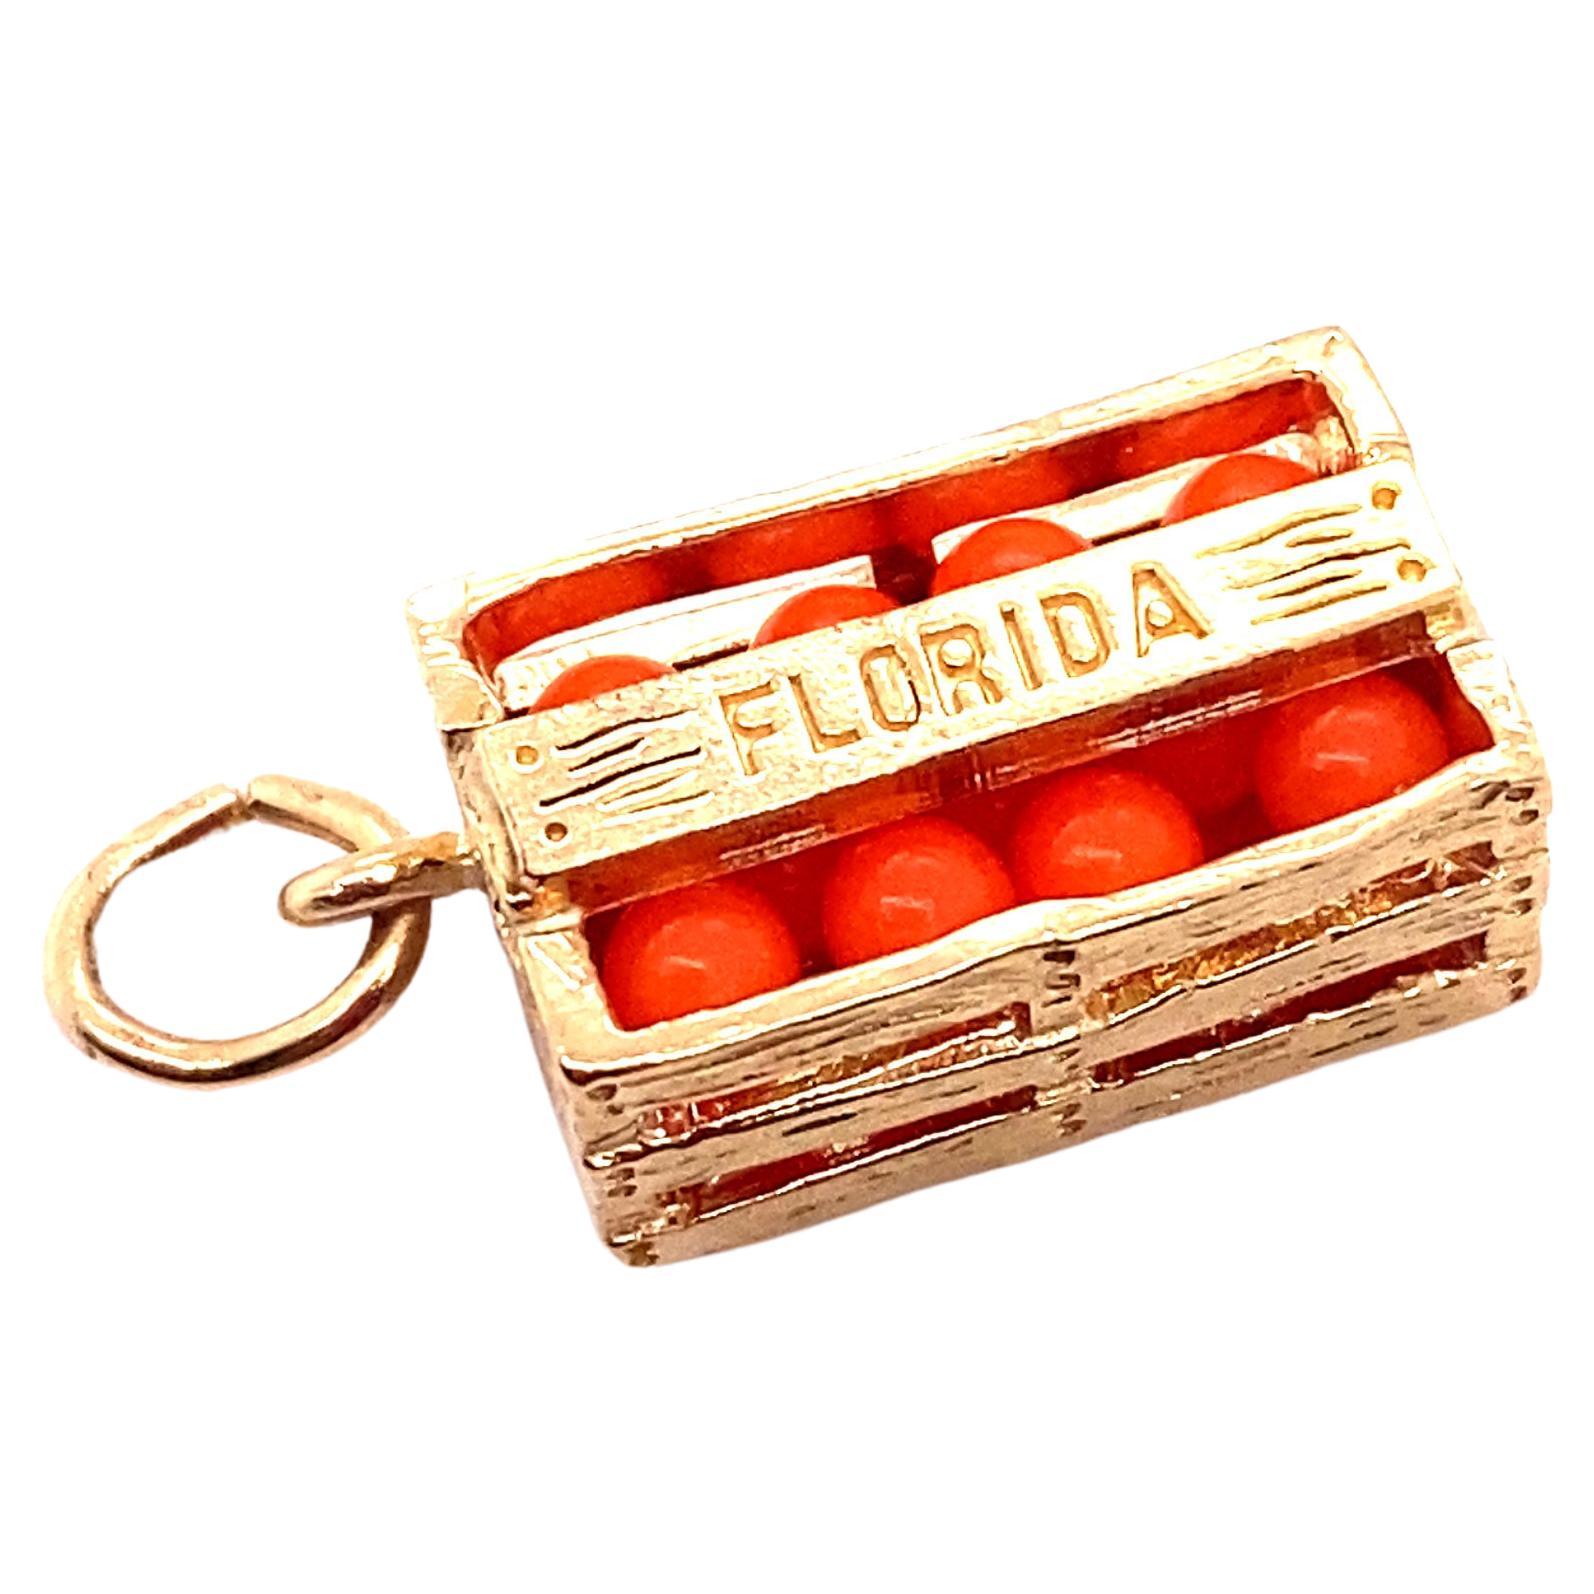 Circa 1980s Florida Oranges Crate Charm in 14K Gold For Sale